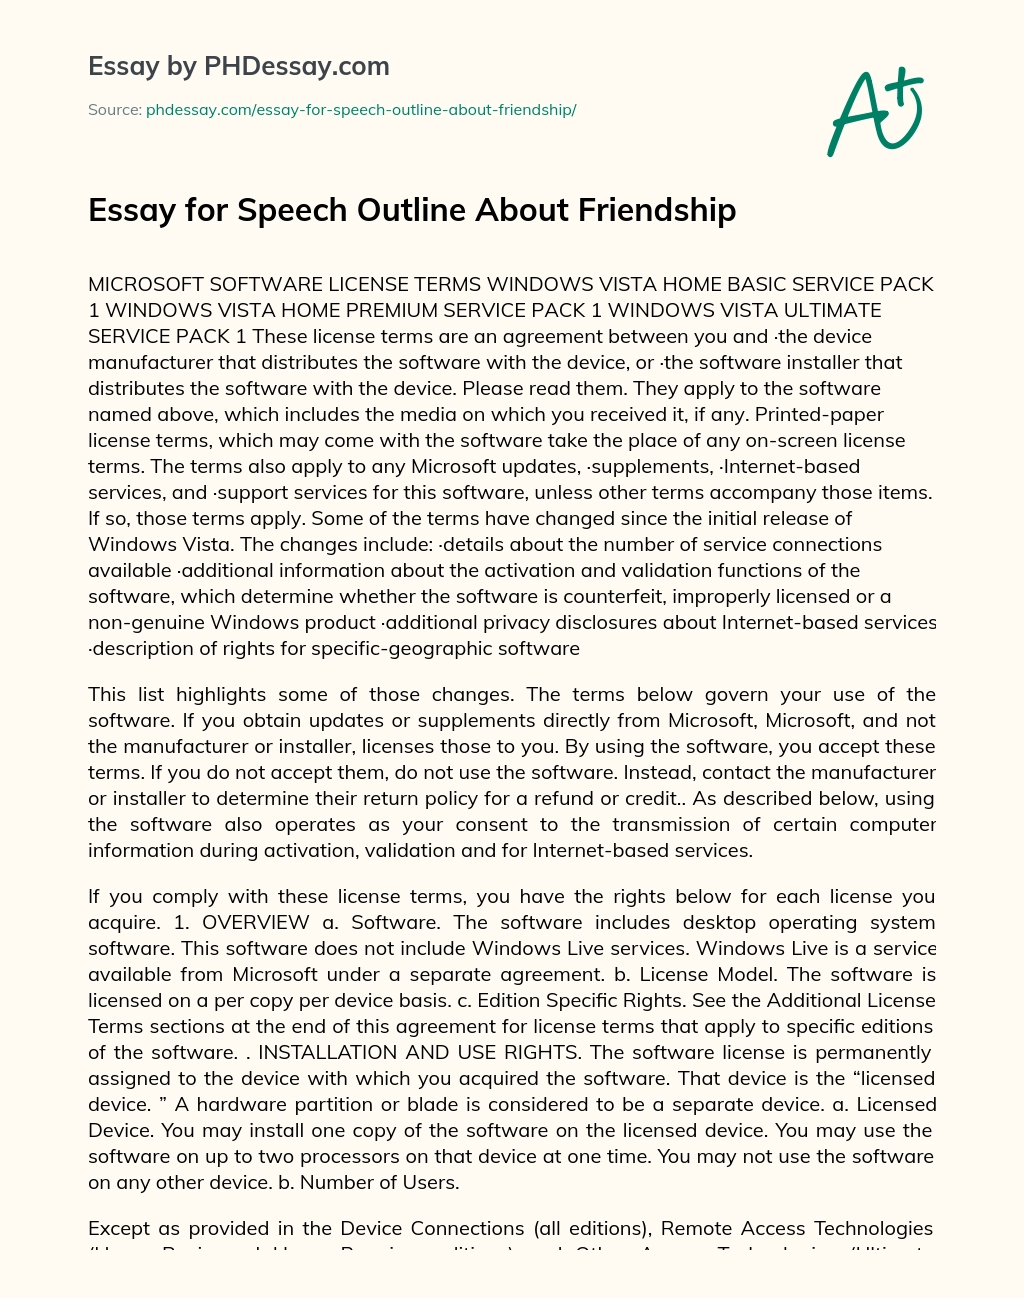 Essay for Speech Outline About Friendship essay